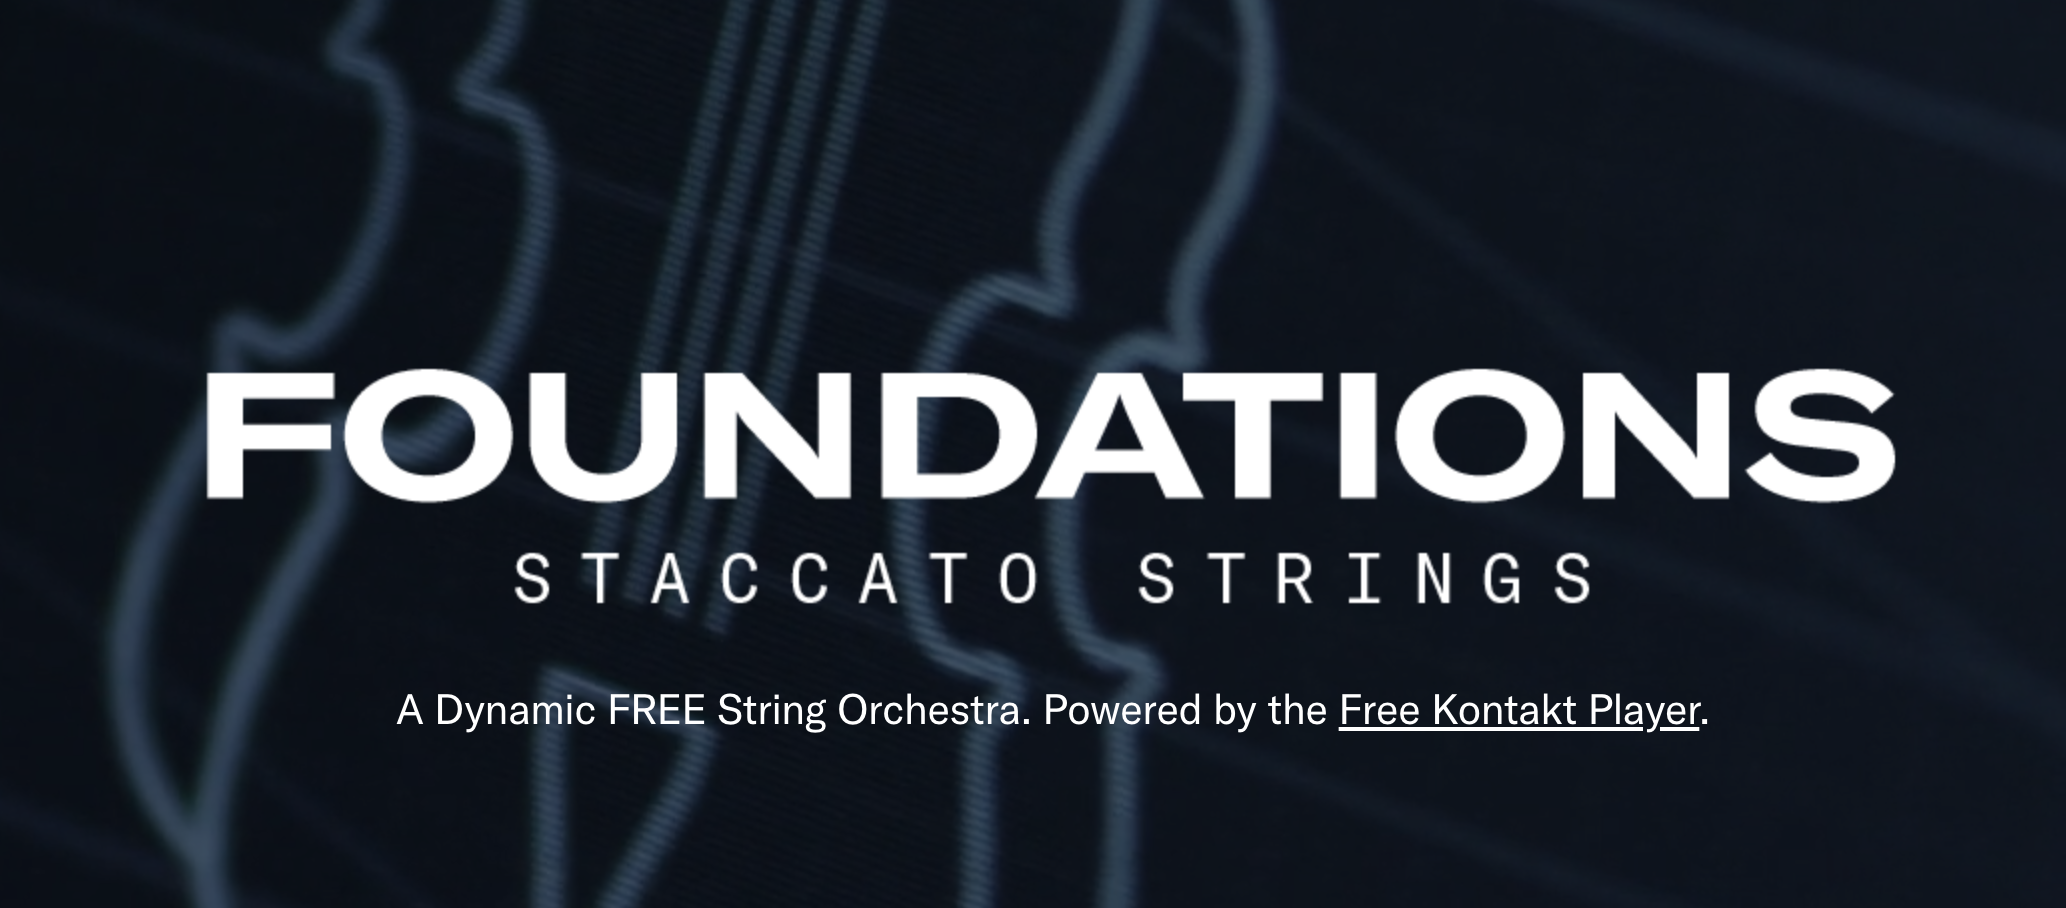 FOUNDATIONS | Staccato Strings: A Powerful Rhythmic Starting Point for Your Next Composition